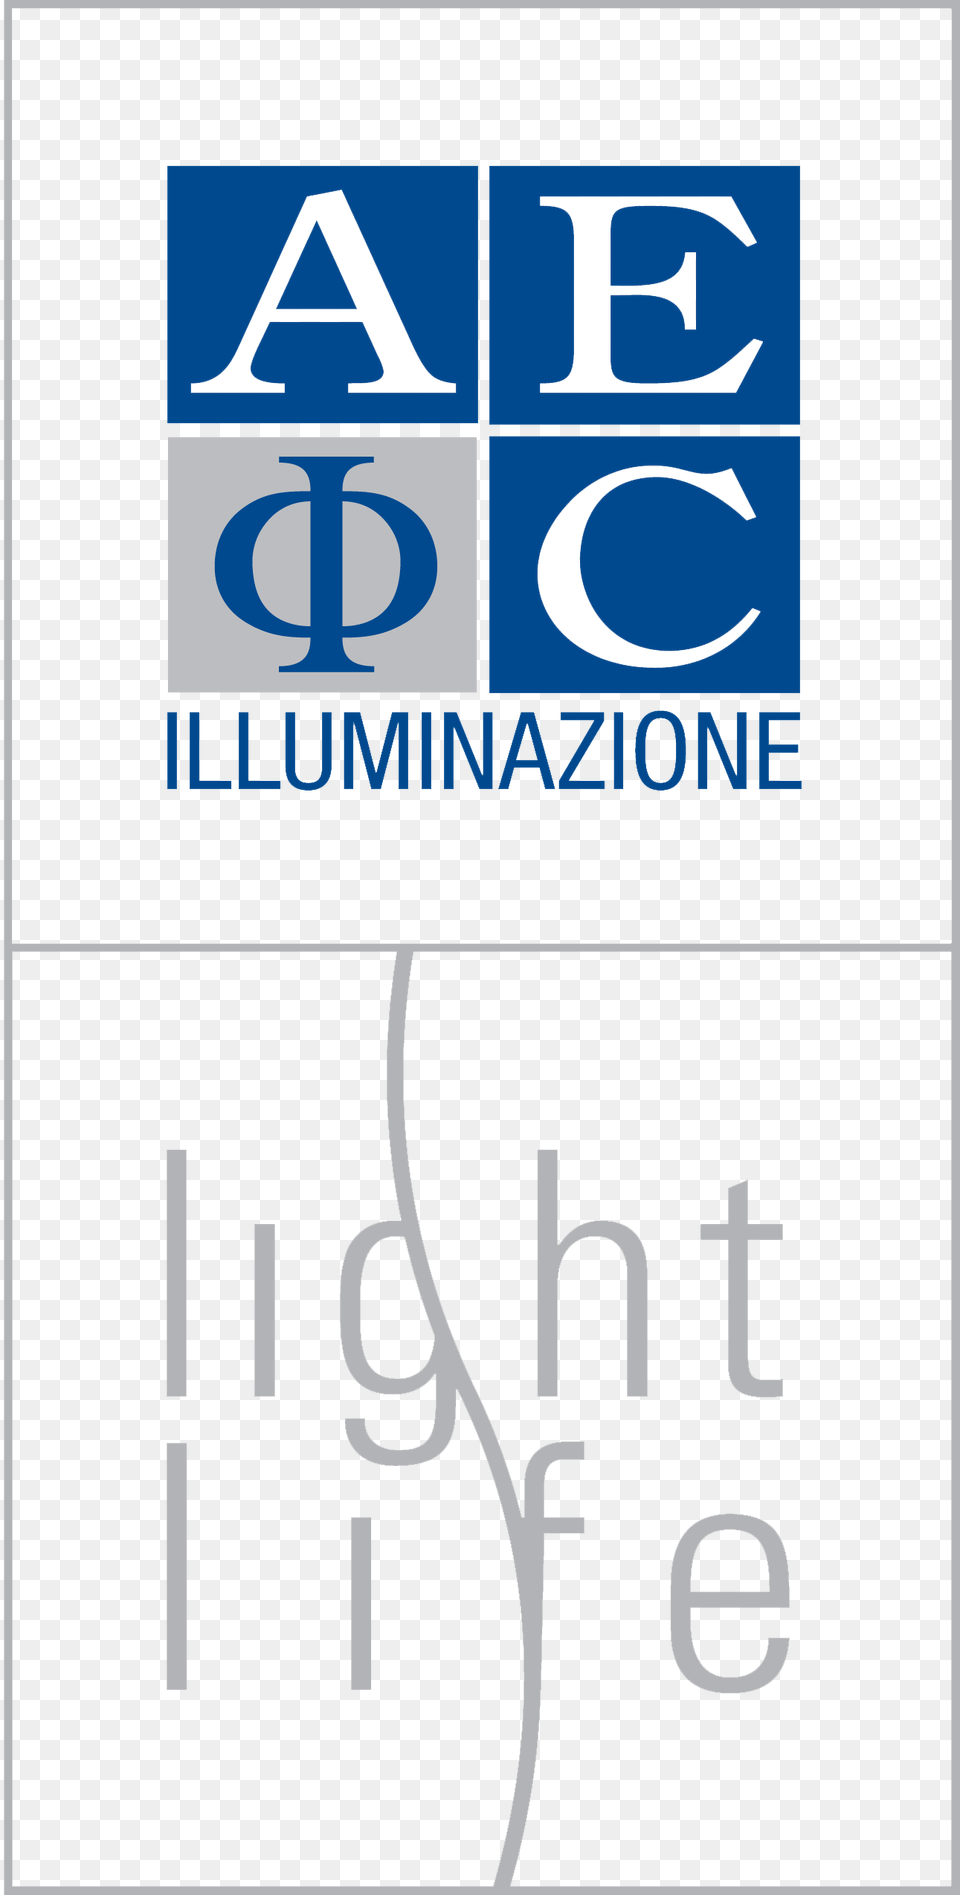 Market Leader In Street Urban And Decorative Lighting Aec Illuminazione, Sign, Symbol, Advertisement, Text Png